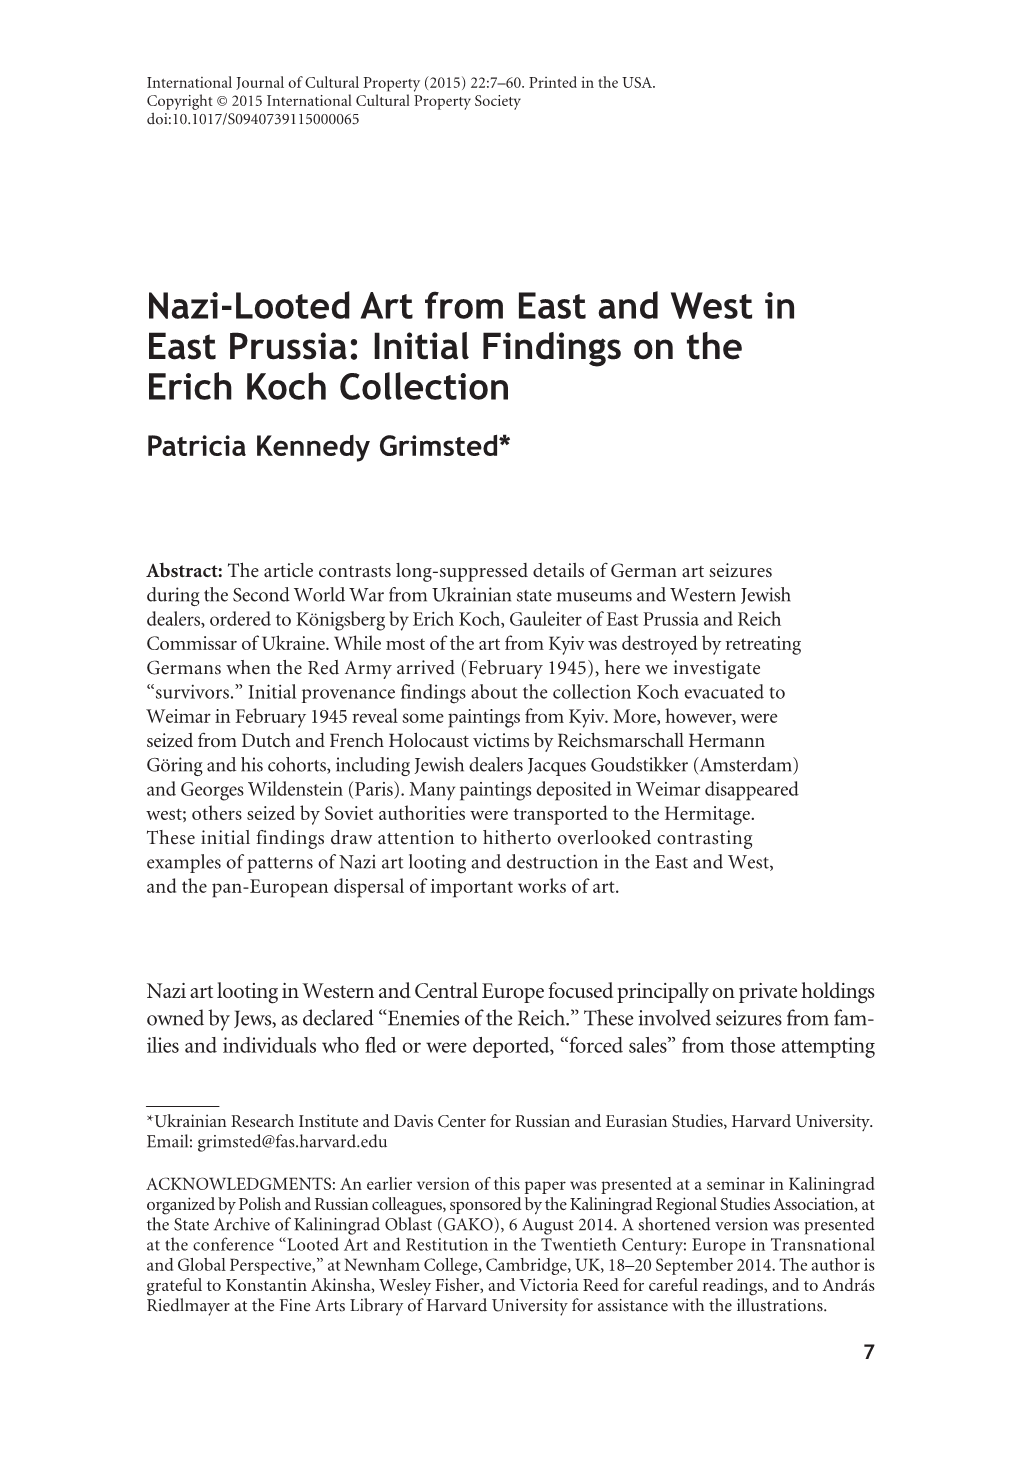 Nazi-Looted Art from East and West in East Prussia: Initial Findings on the Erich Koch Collection Patricia Kennedy Grimsted *